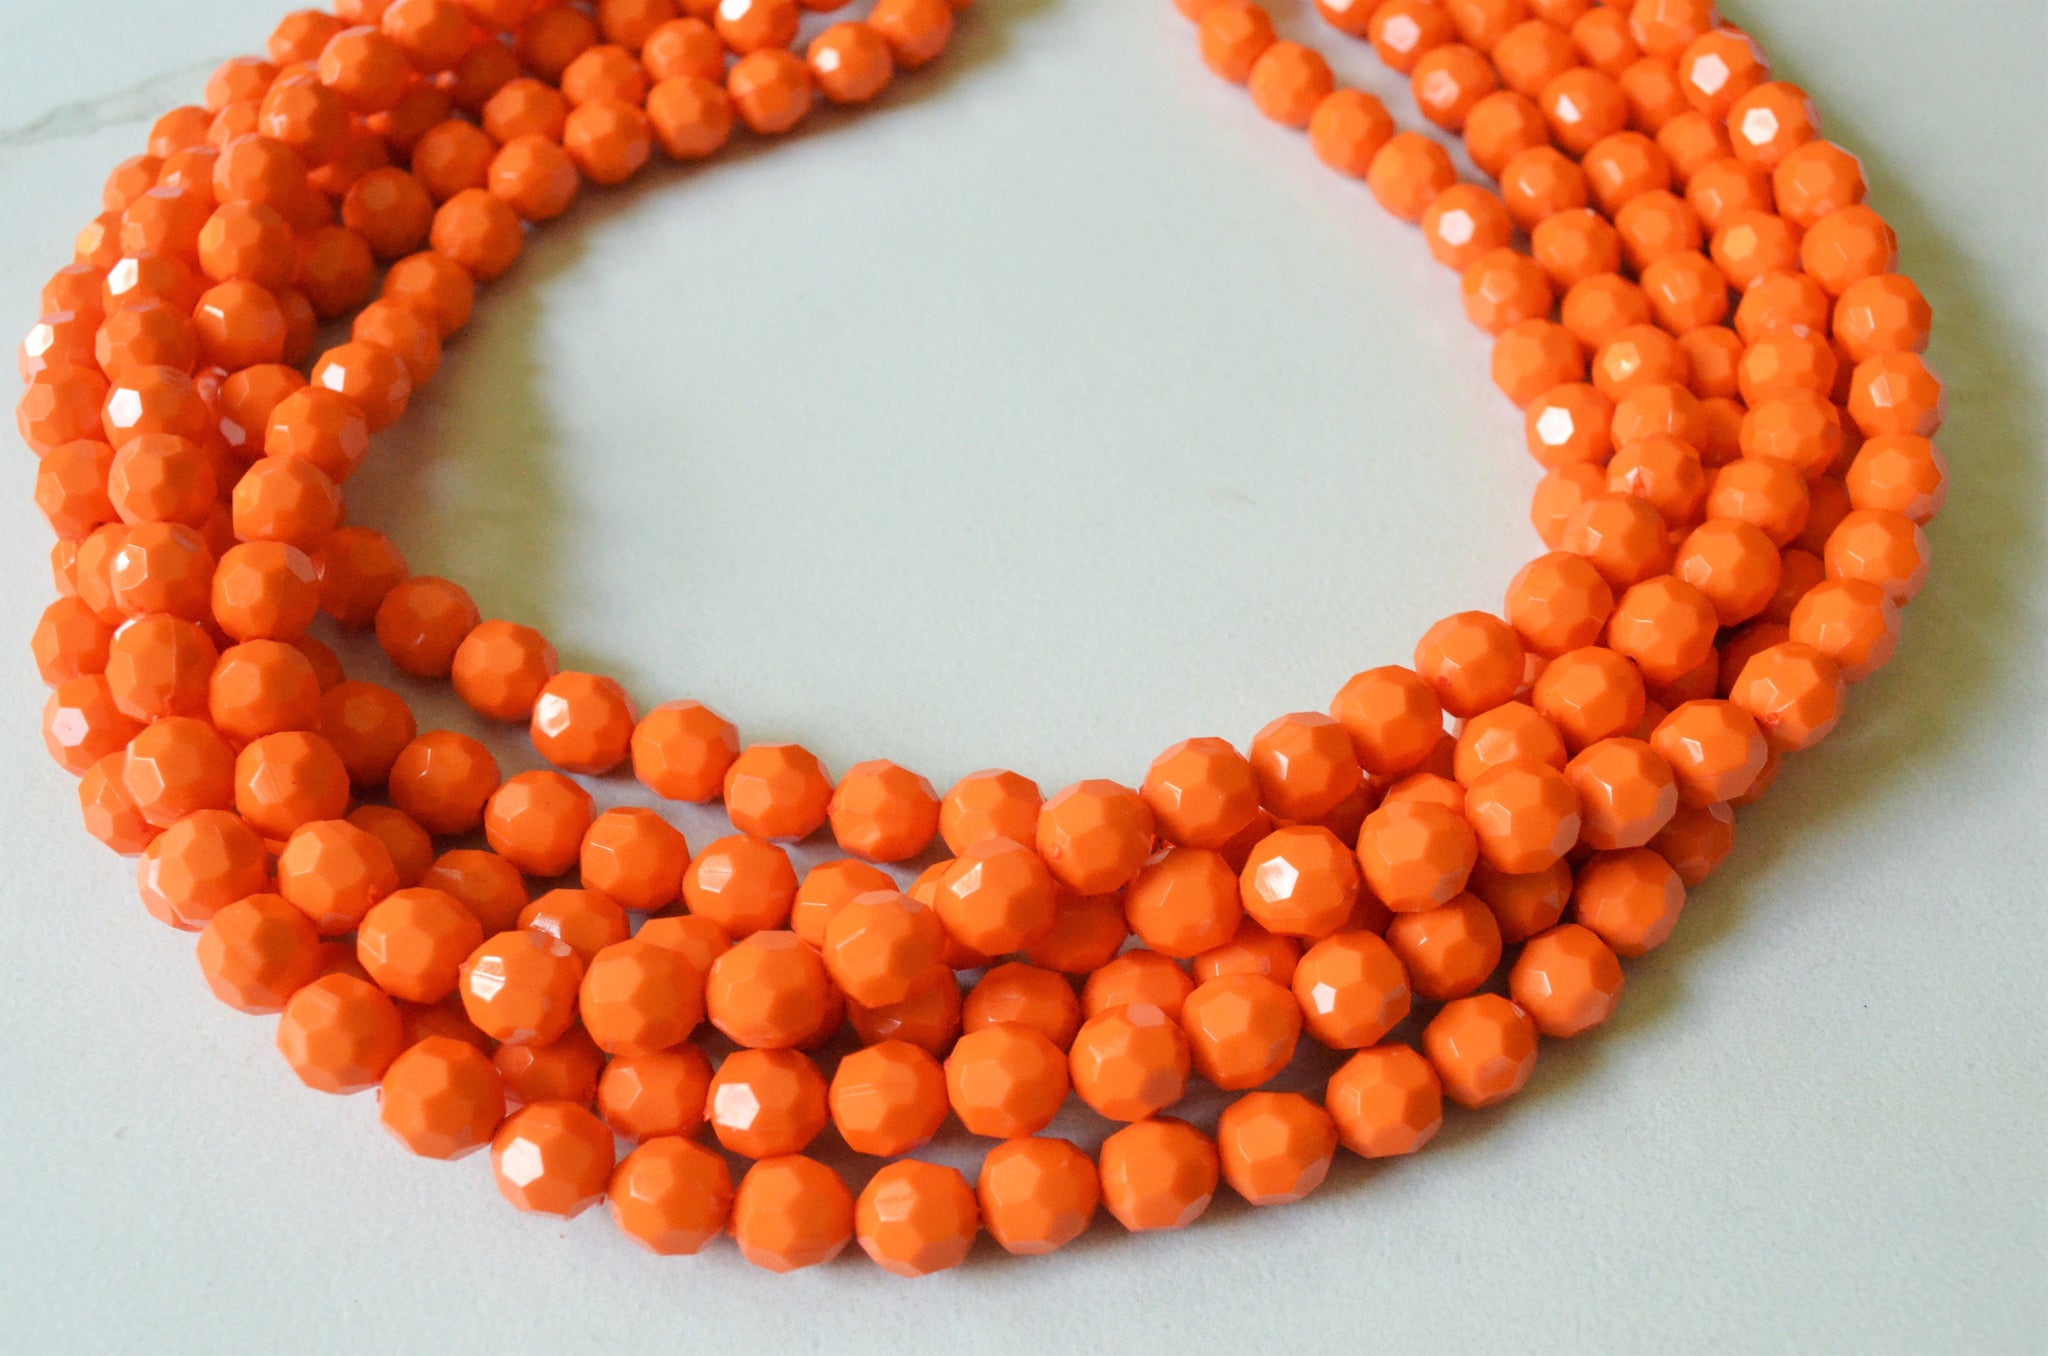 Multistrand, graduated and other coral necklaces and chains